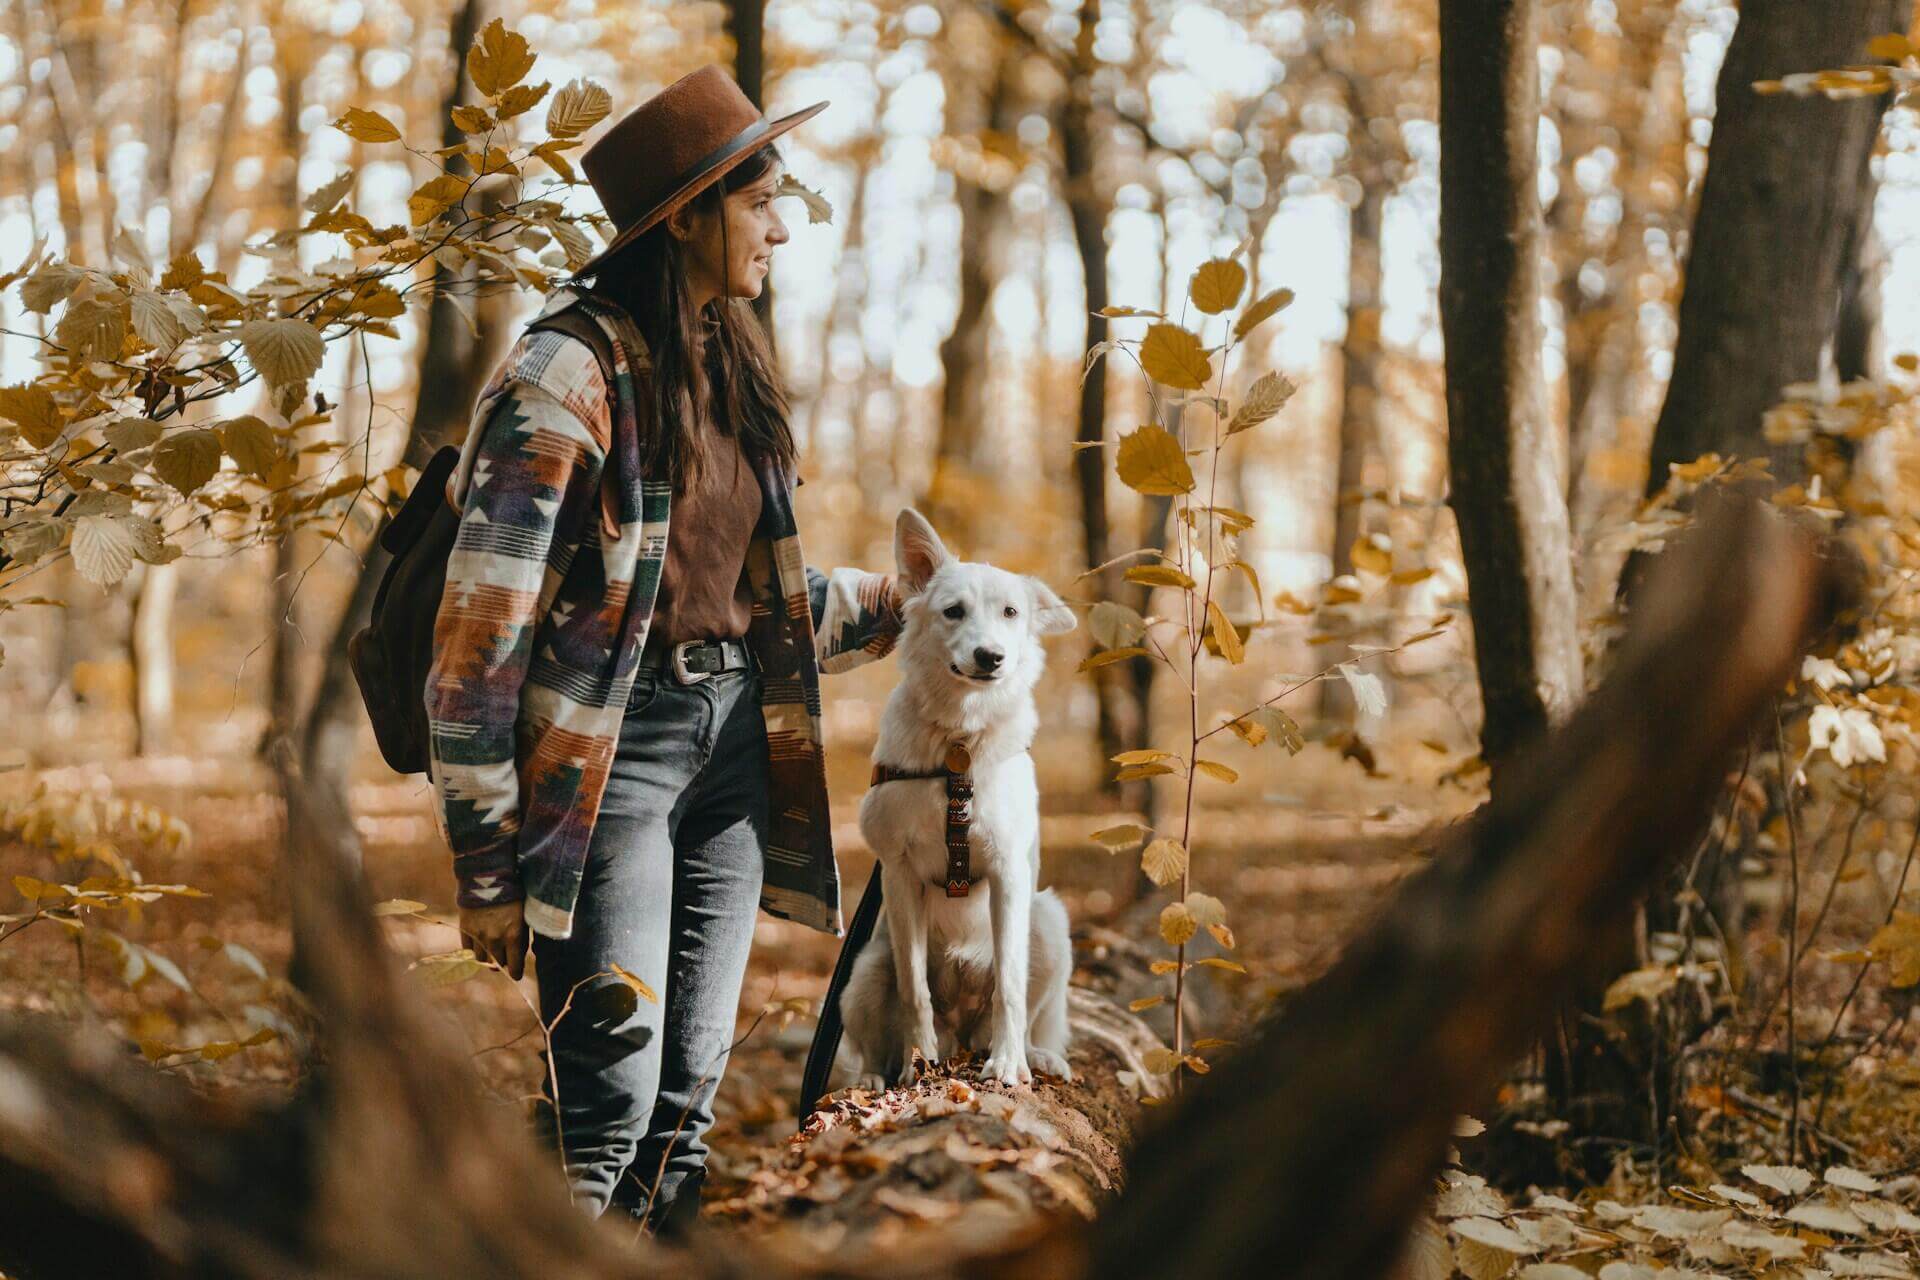 A woman leading a white dog on a leash through the woods